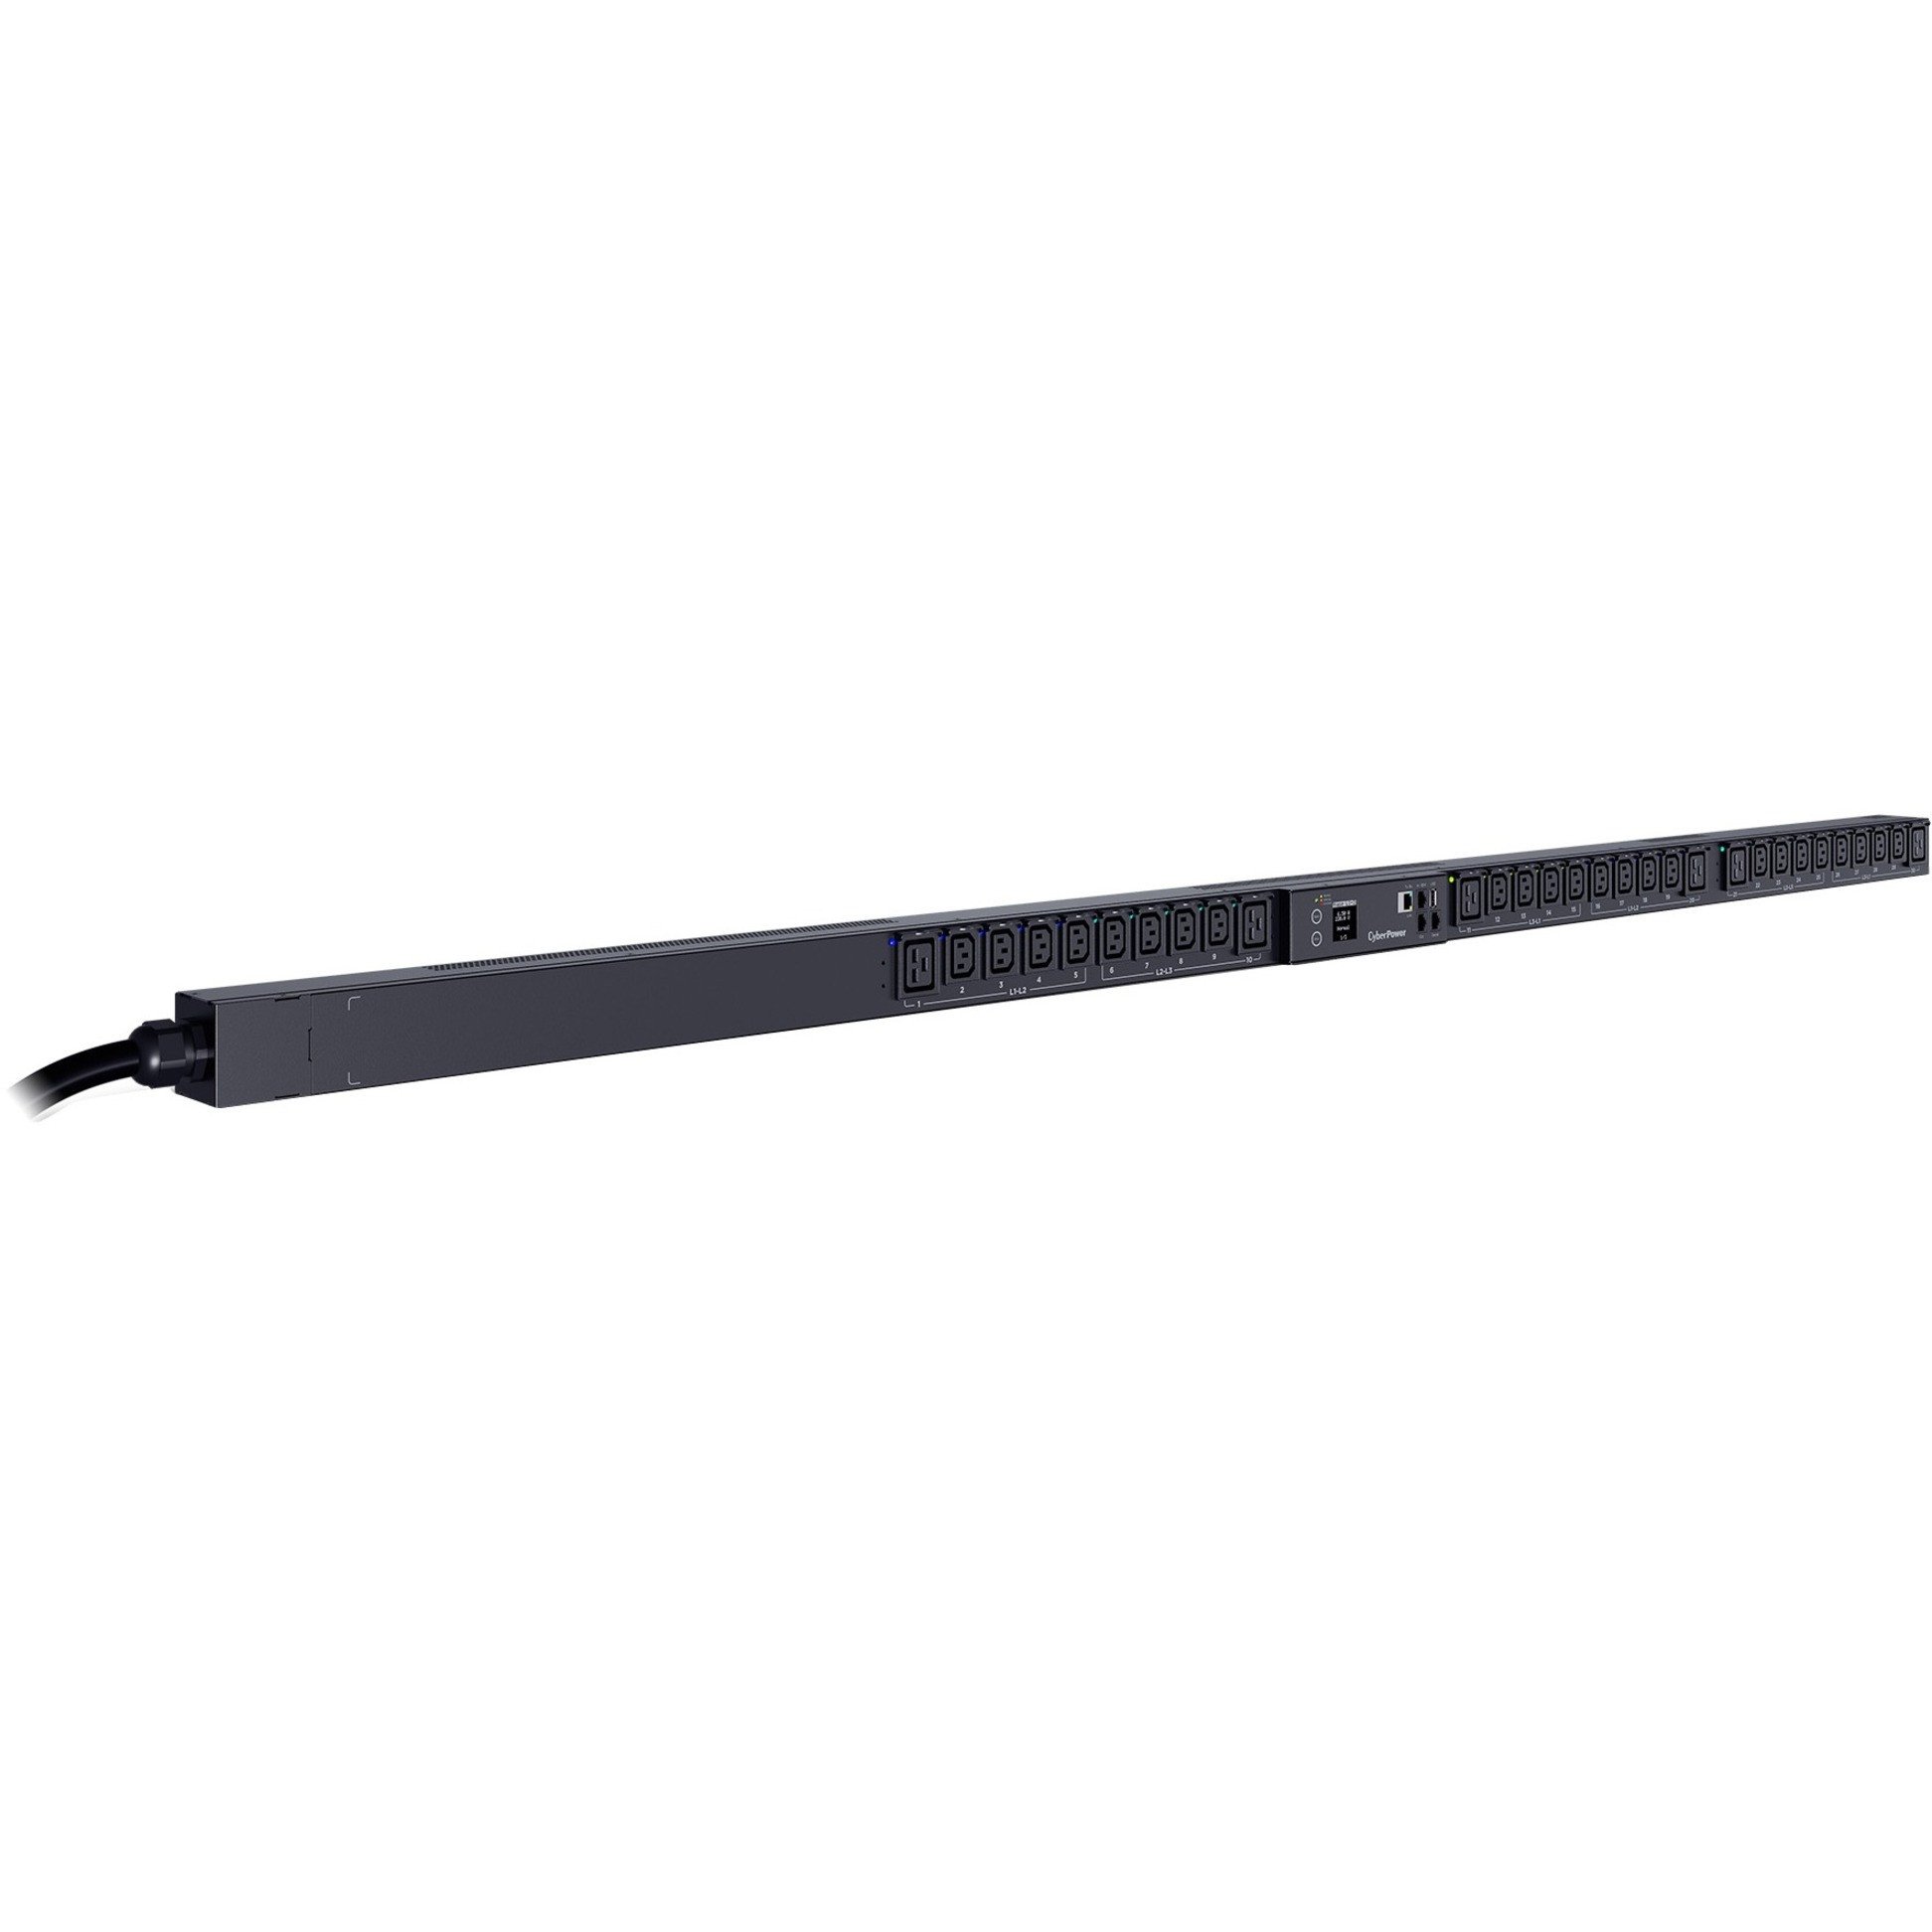 Cyber Power PDU83103 3 Phase 200240 VAC 20A Switched Metered-by-Outlet PDU30 Outlets, 10 ft, NEMA L15-20P, Vertical, 0U, LCD,  Warranty PDU83103